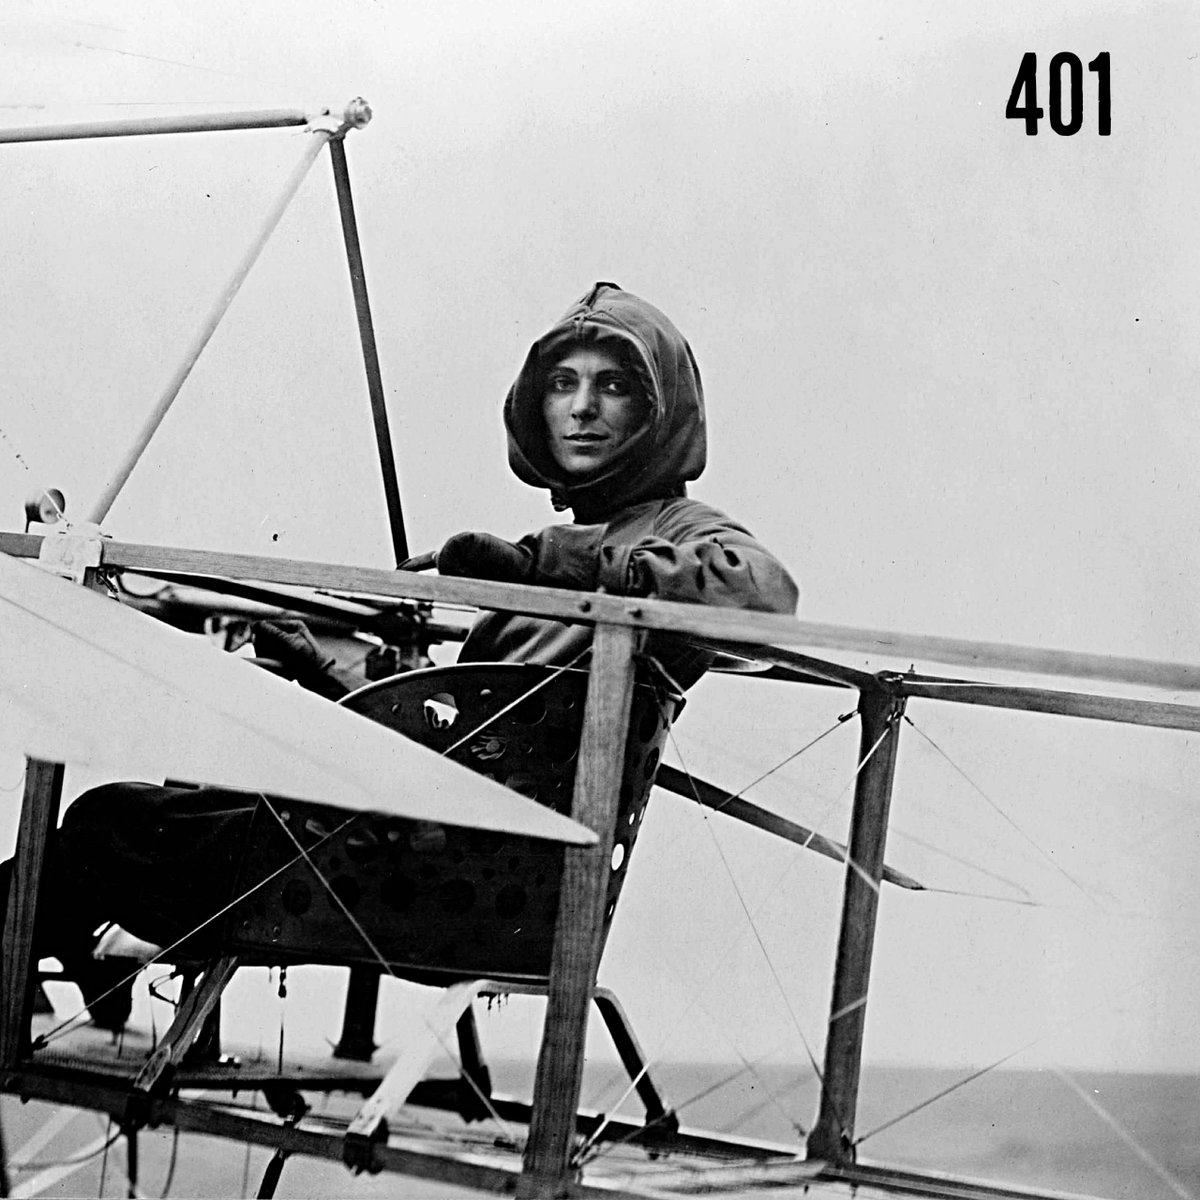 On April 16, 1912, Harriet Quimby became the first woman to fly an airplane across the English Channel. Today also marks 401 days since Cllr Sarah Warren said she wanted a healthy debate on LTNs and how we get around in Bath. That promise hasn't got off the ground.